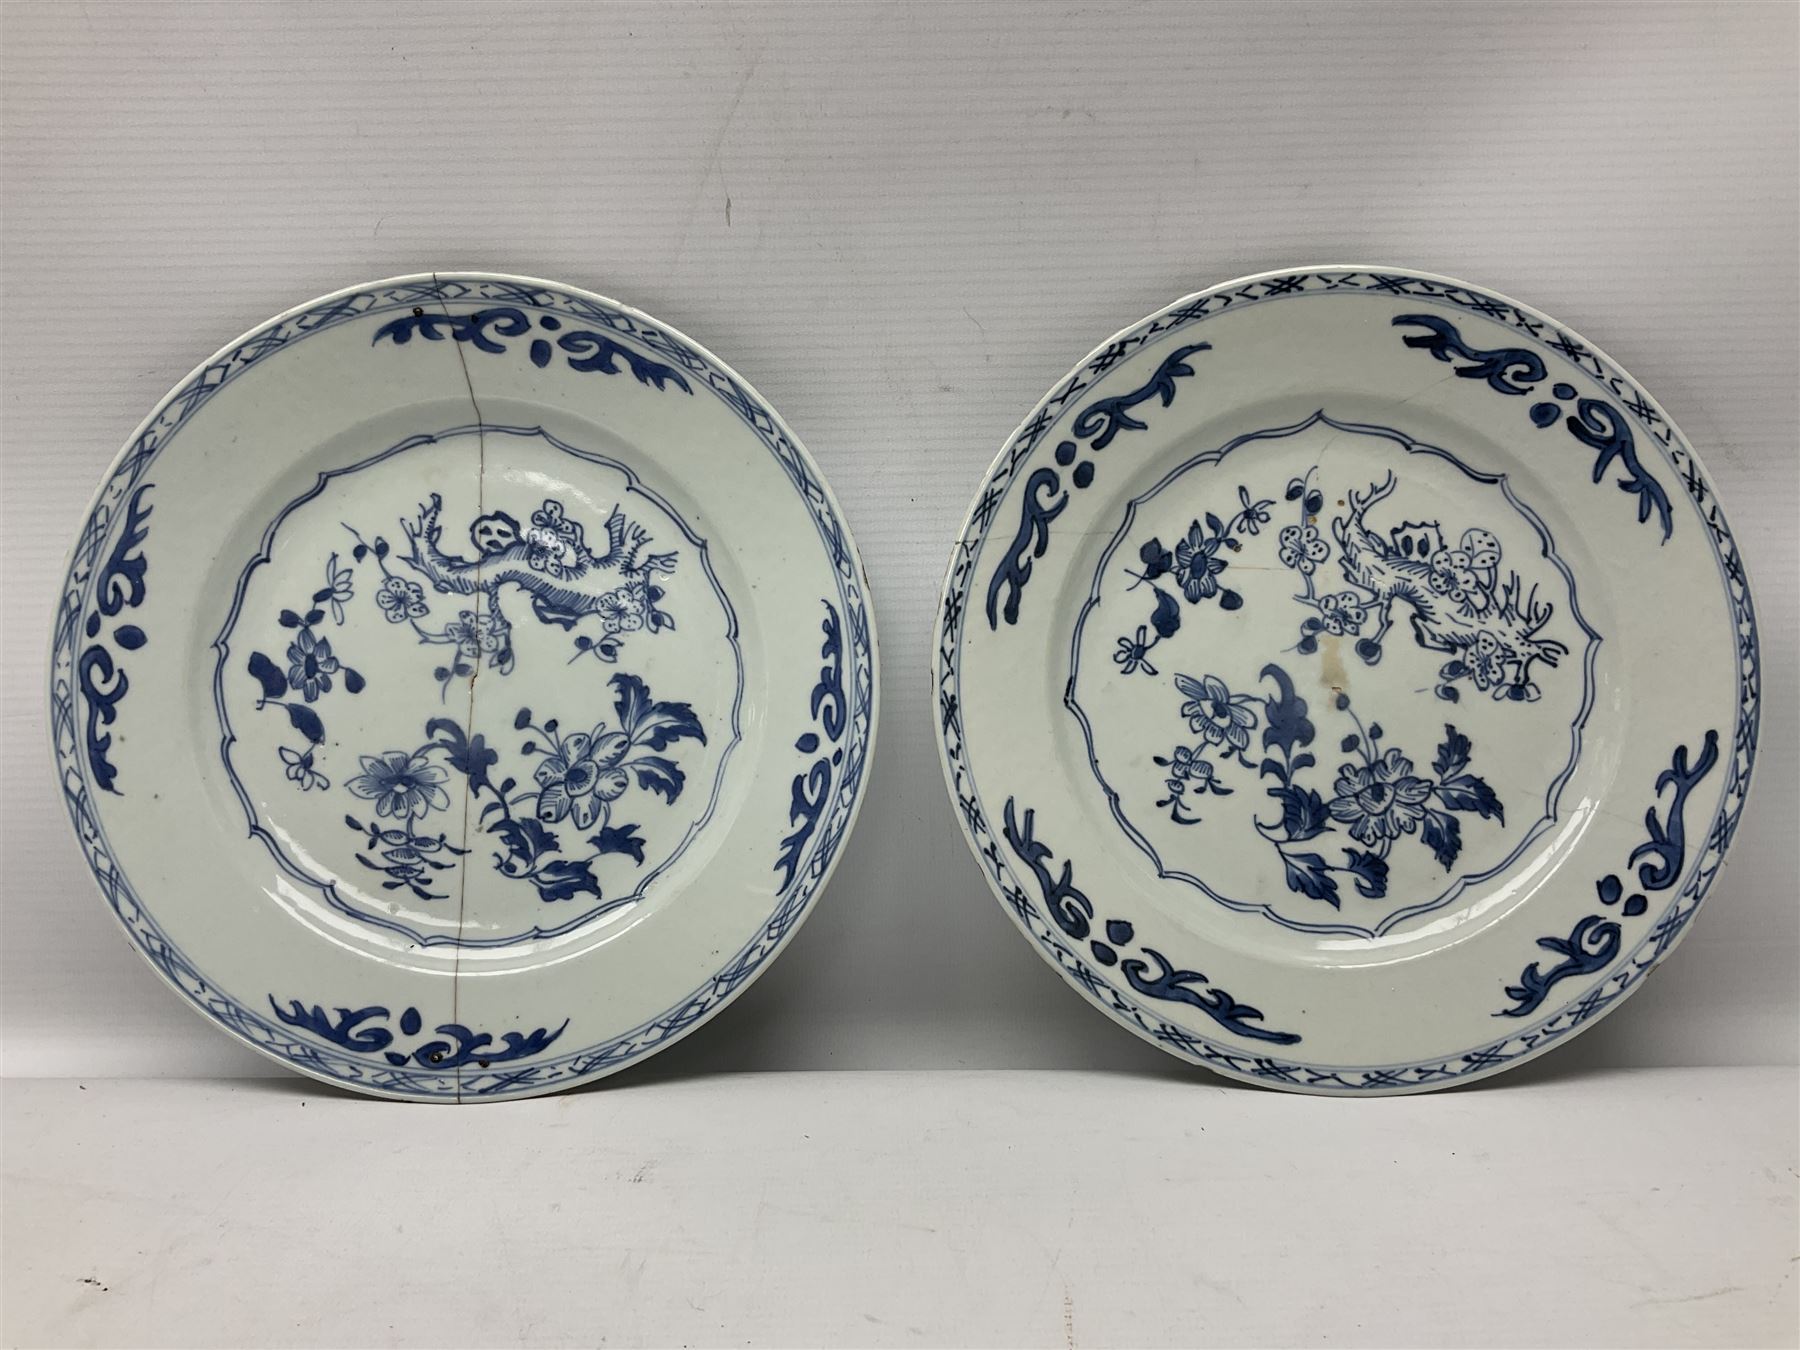 Set of four 18th century Chinese export blue and white porcelain plates with painted foliate decorat - Image 8 of 14